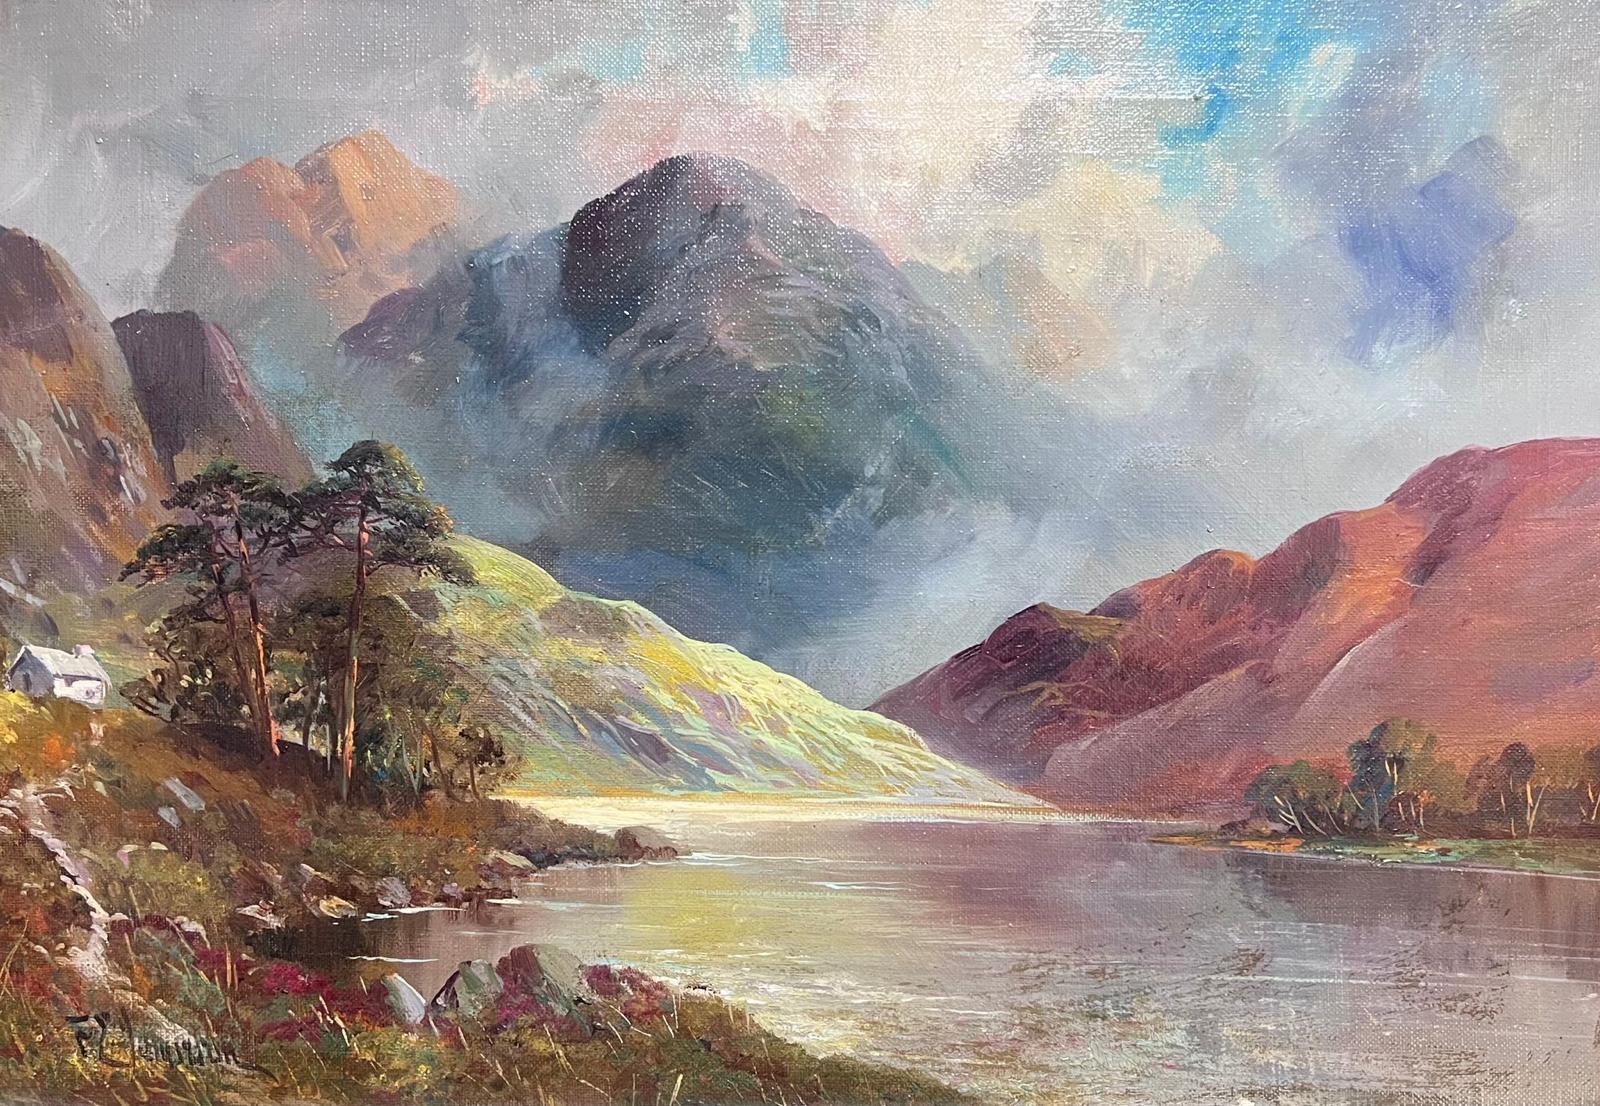 F. E. Jamieson Landscape Painting - Antique Scottish Highland Landscape Signed Oil Painting Loch in Mountains